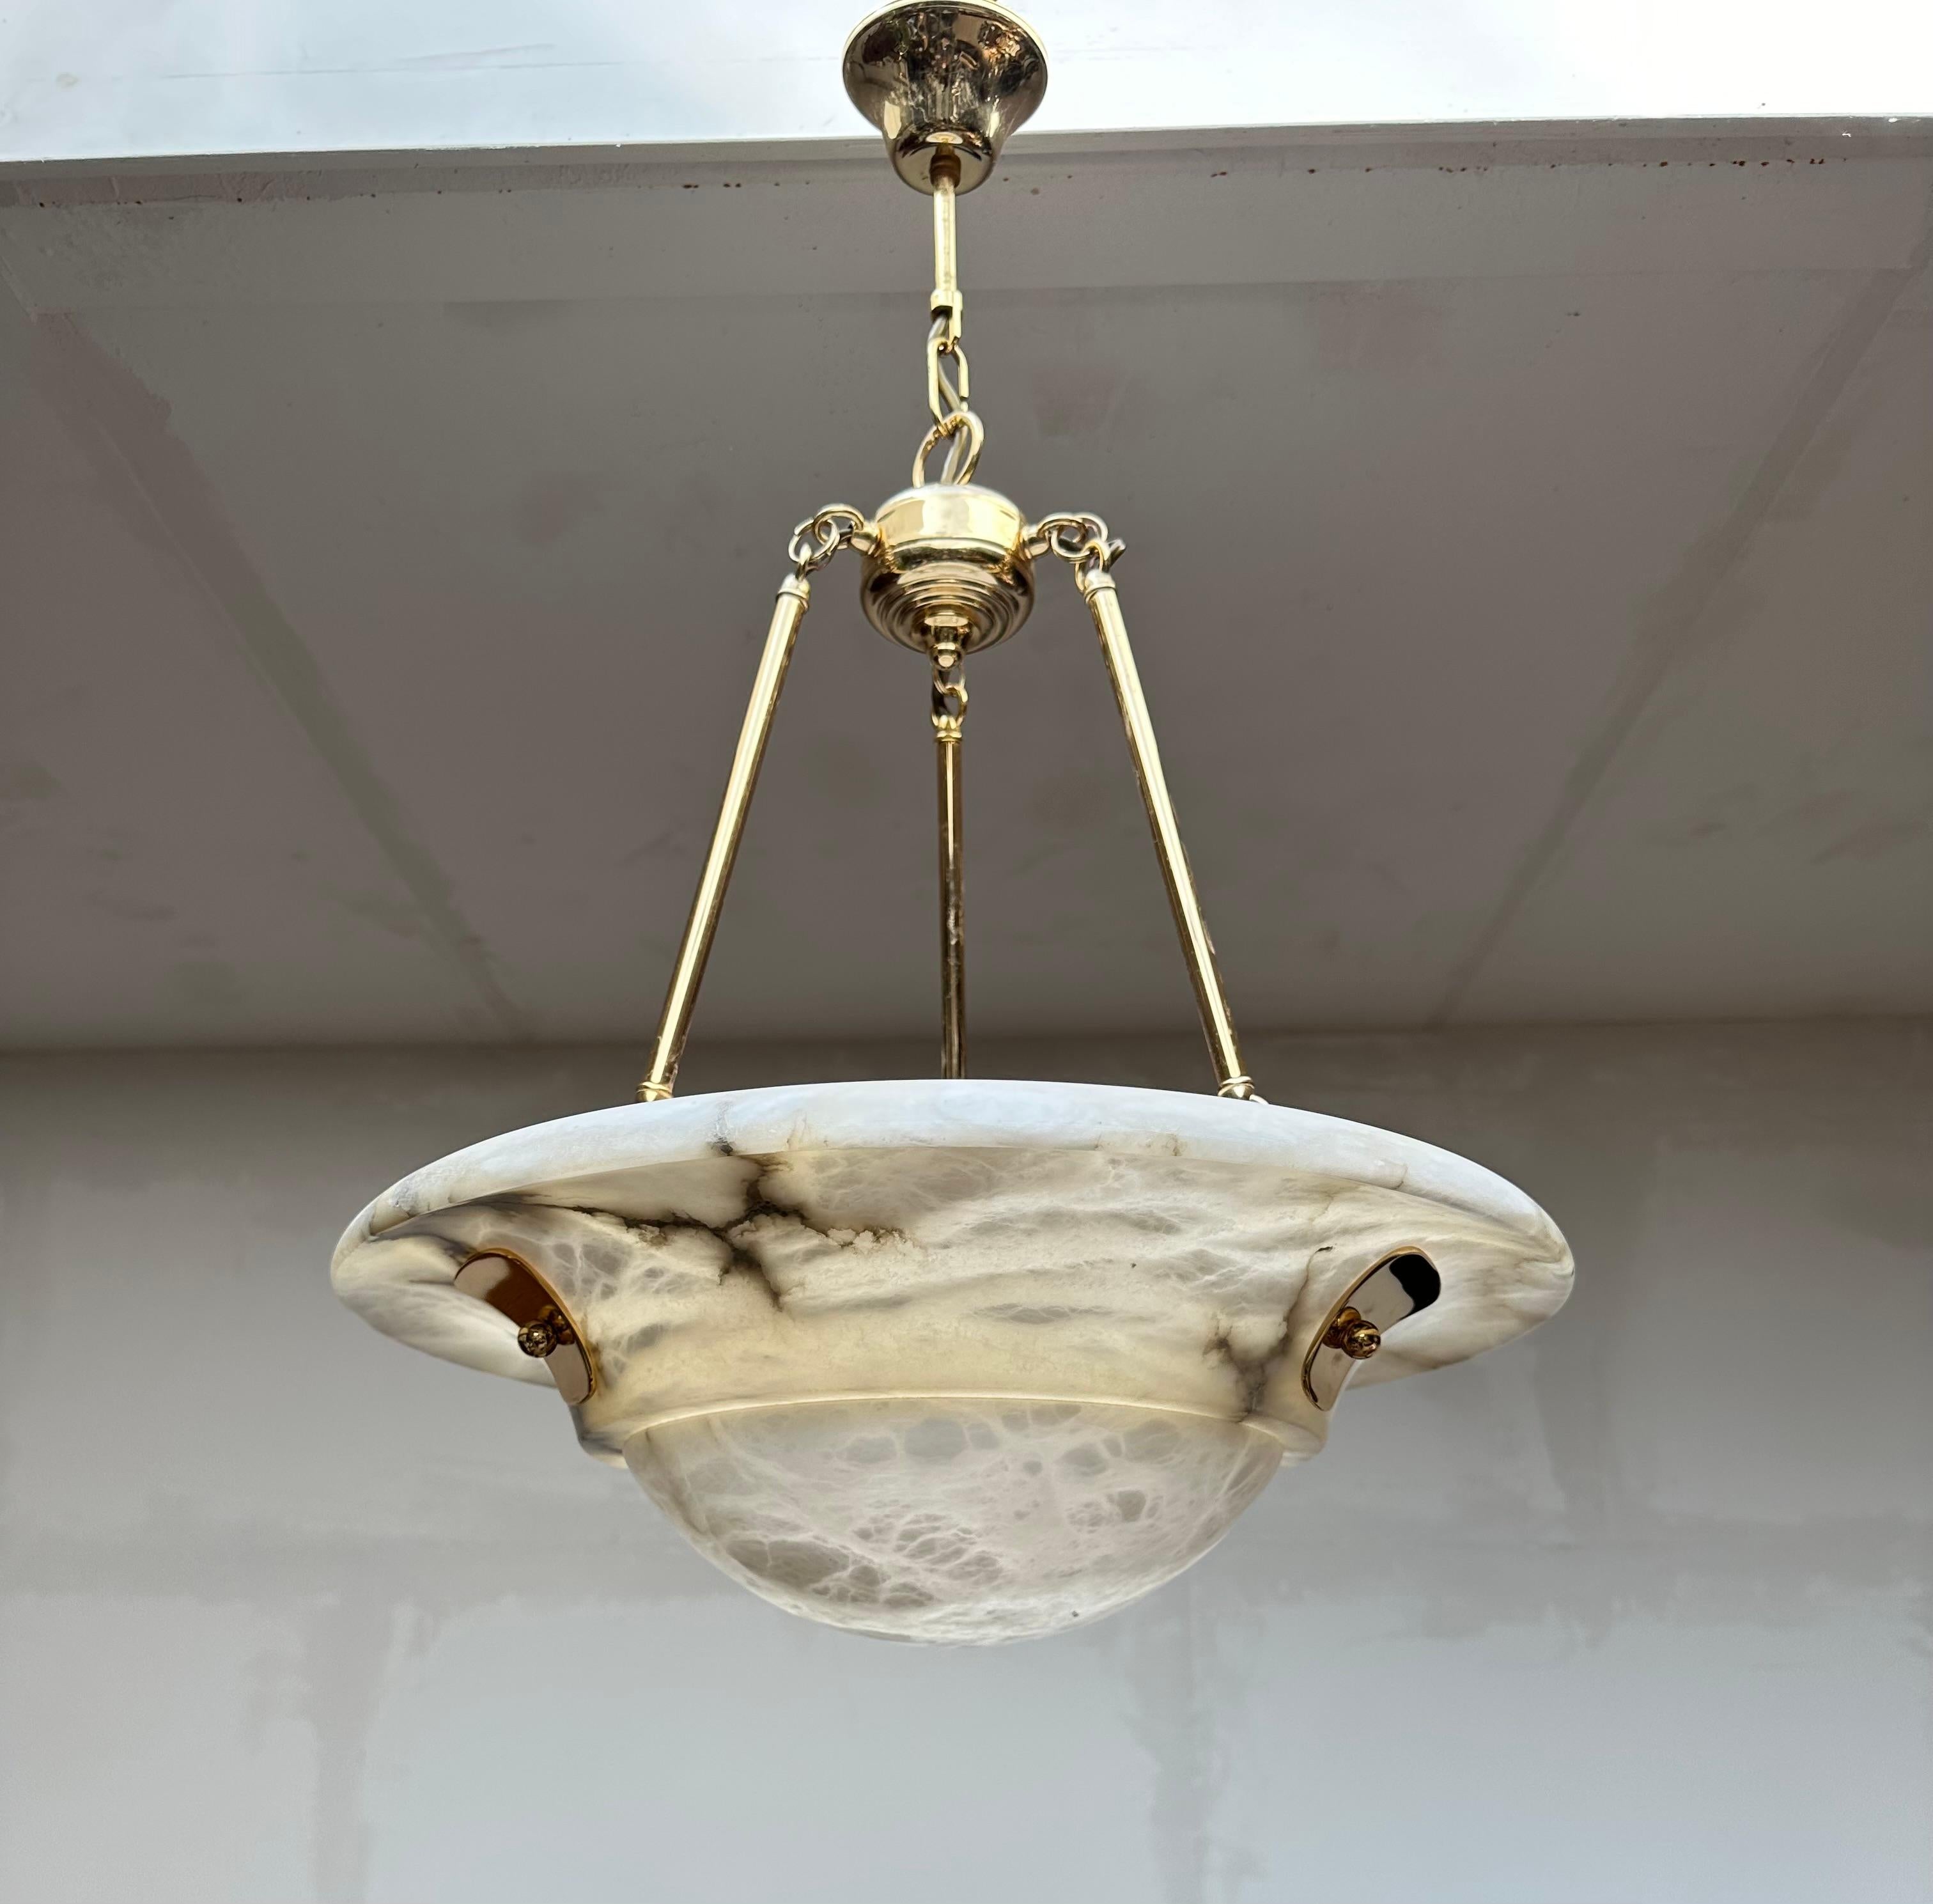 Large, excellent condition and rare design, three light chandelier.

Thanks to its 'calm' and timeless Art Deco design this alabaster chandelier will look great in all kinds of interiors. It is in very good condition and the natural veins and